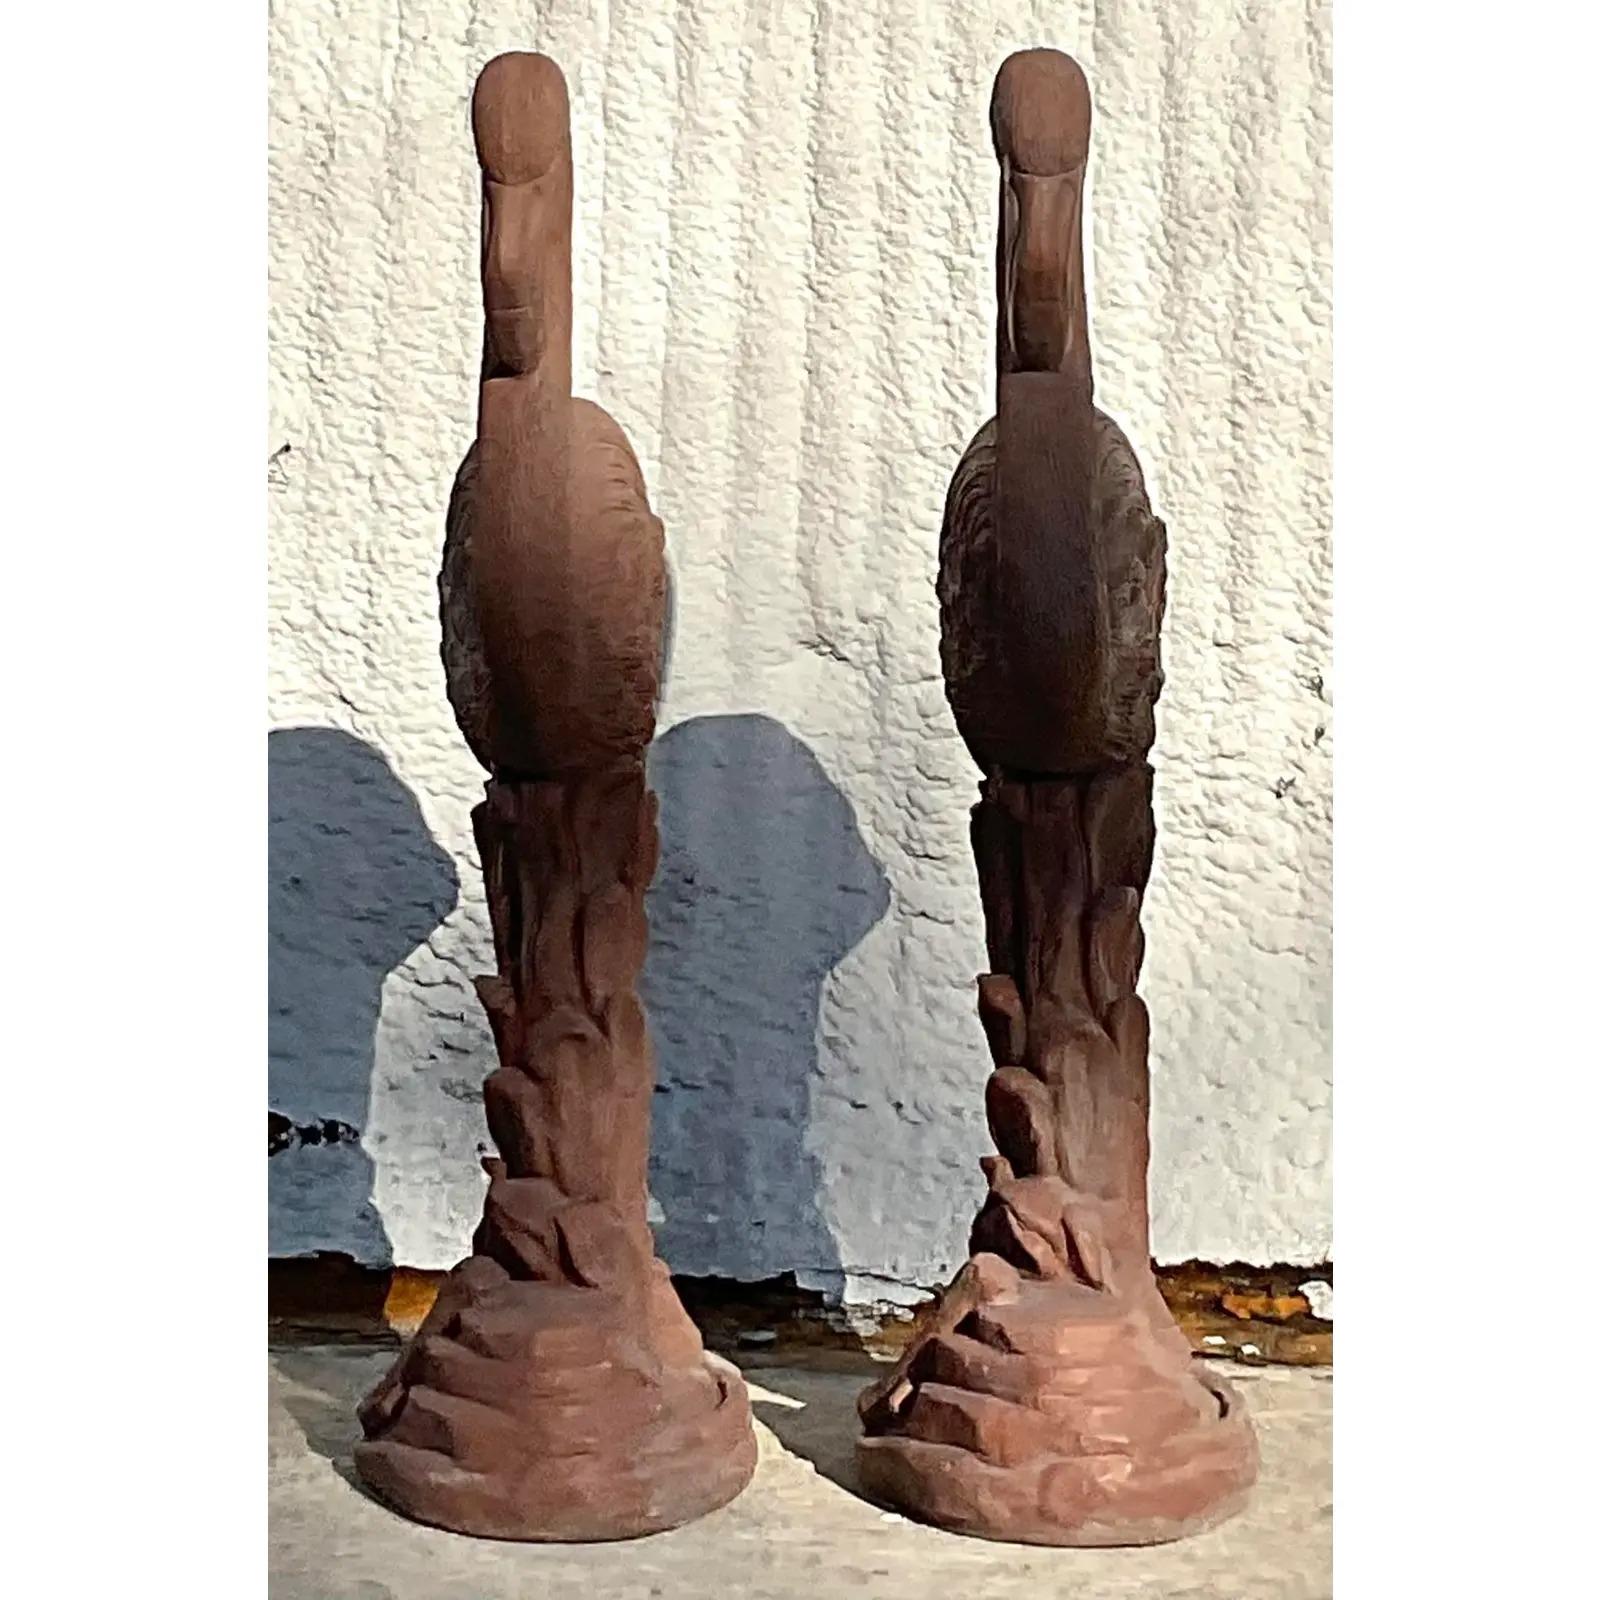 A fabulous pair of vintage Coastal outdoor statues. Chic cast cement in a pale terracotta color. Perfect outside or indoors. You decide! Acquired from a Palm Beach estate.